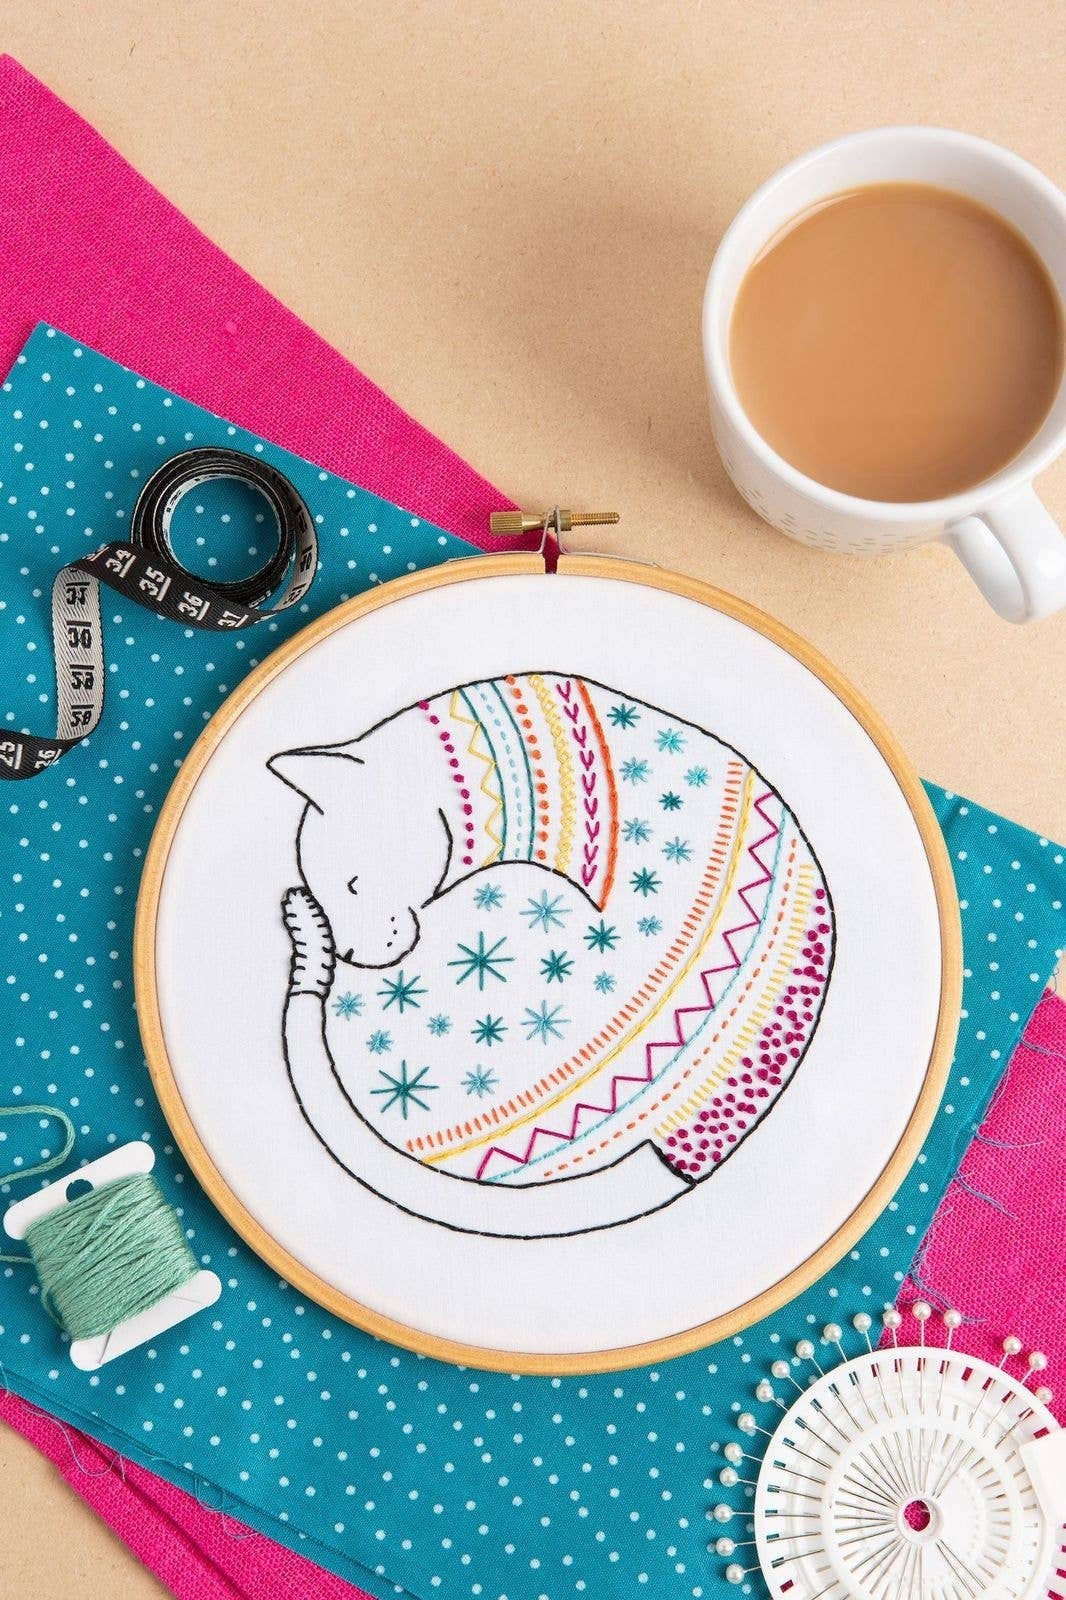 Cat Embroidery Kits for Beginners, Embroidery Kits for Adults